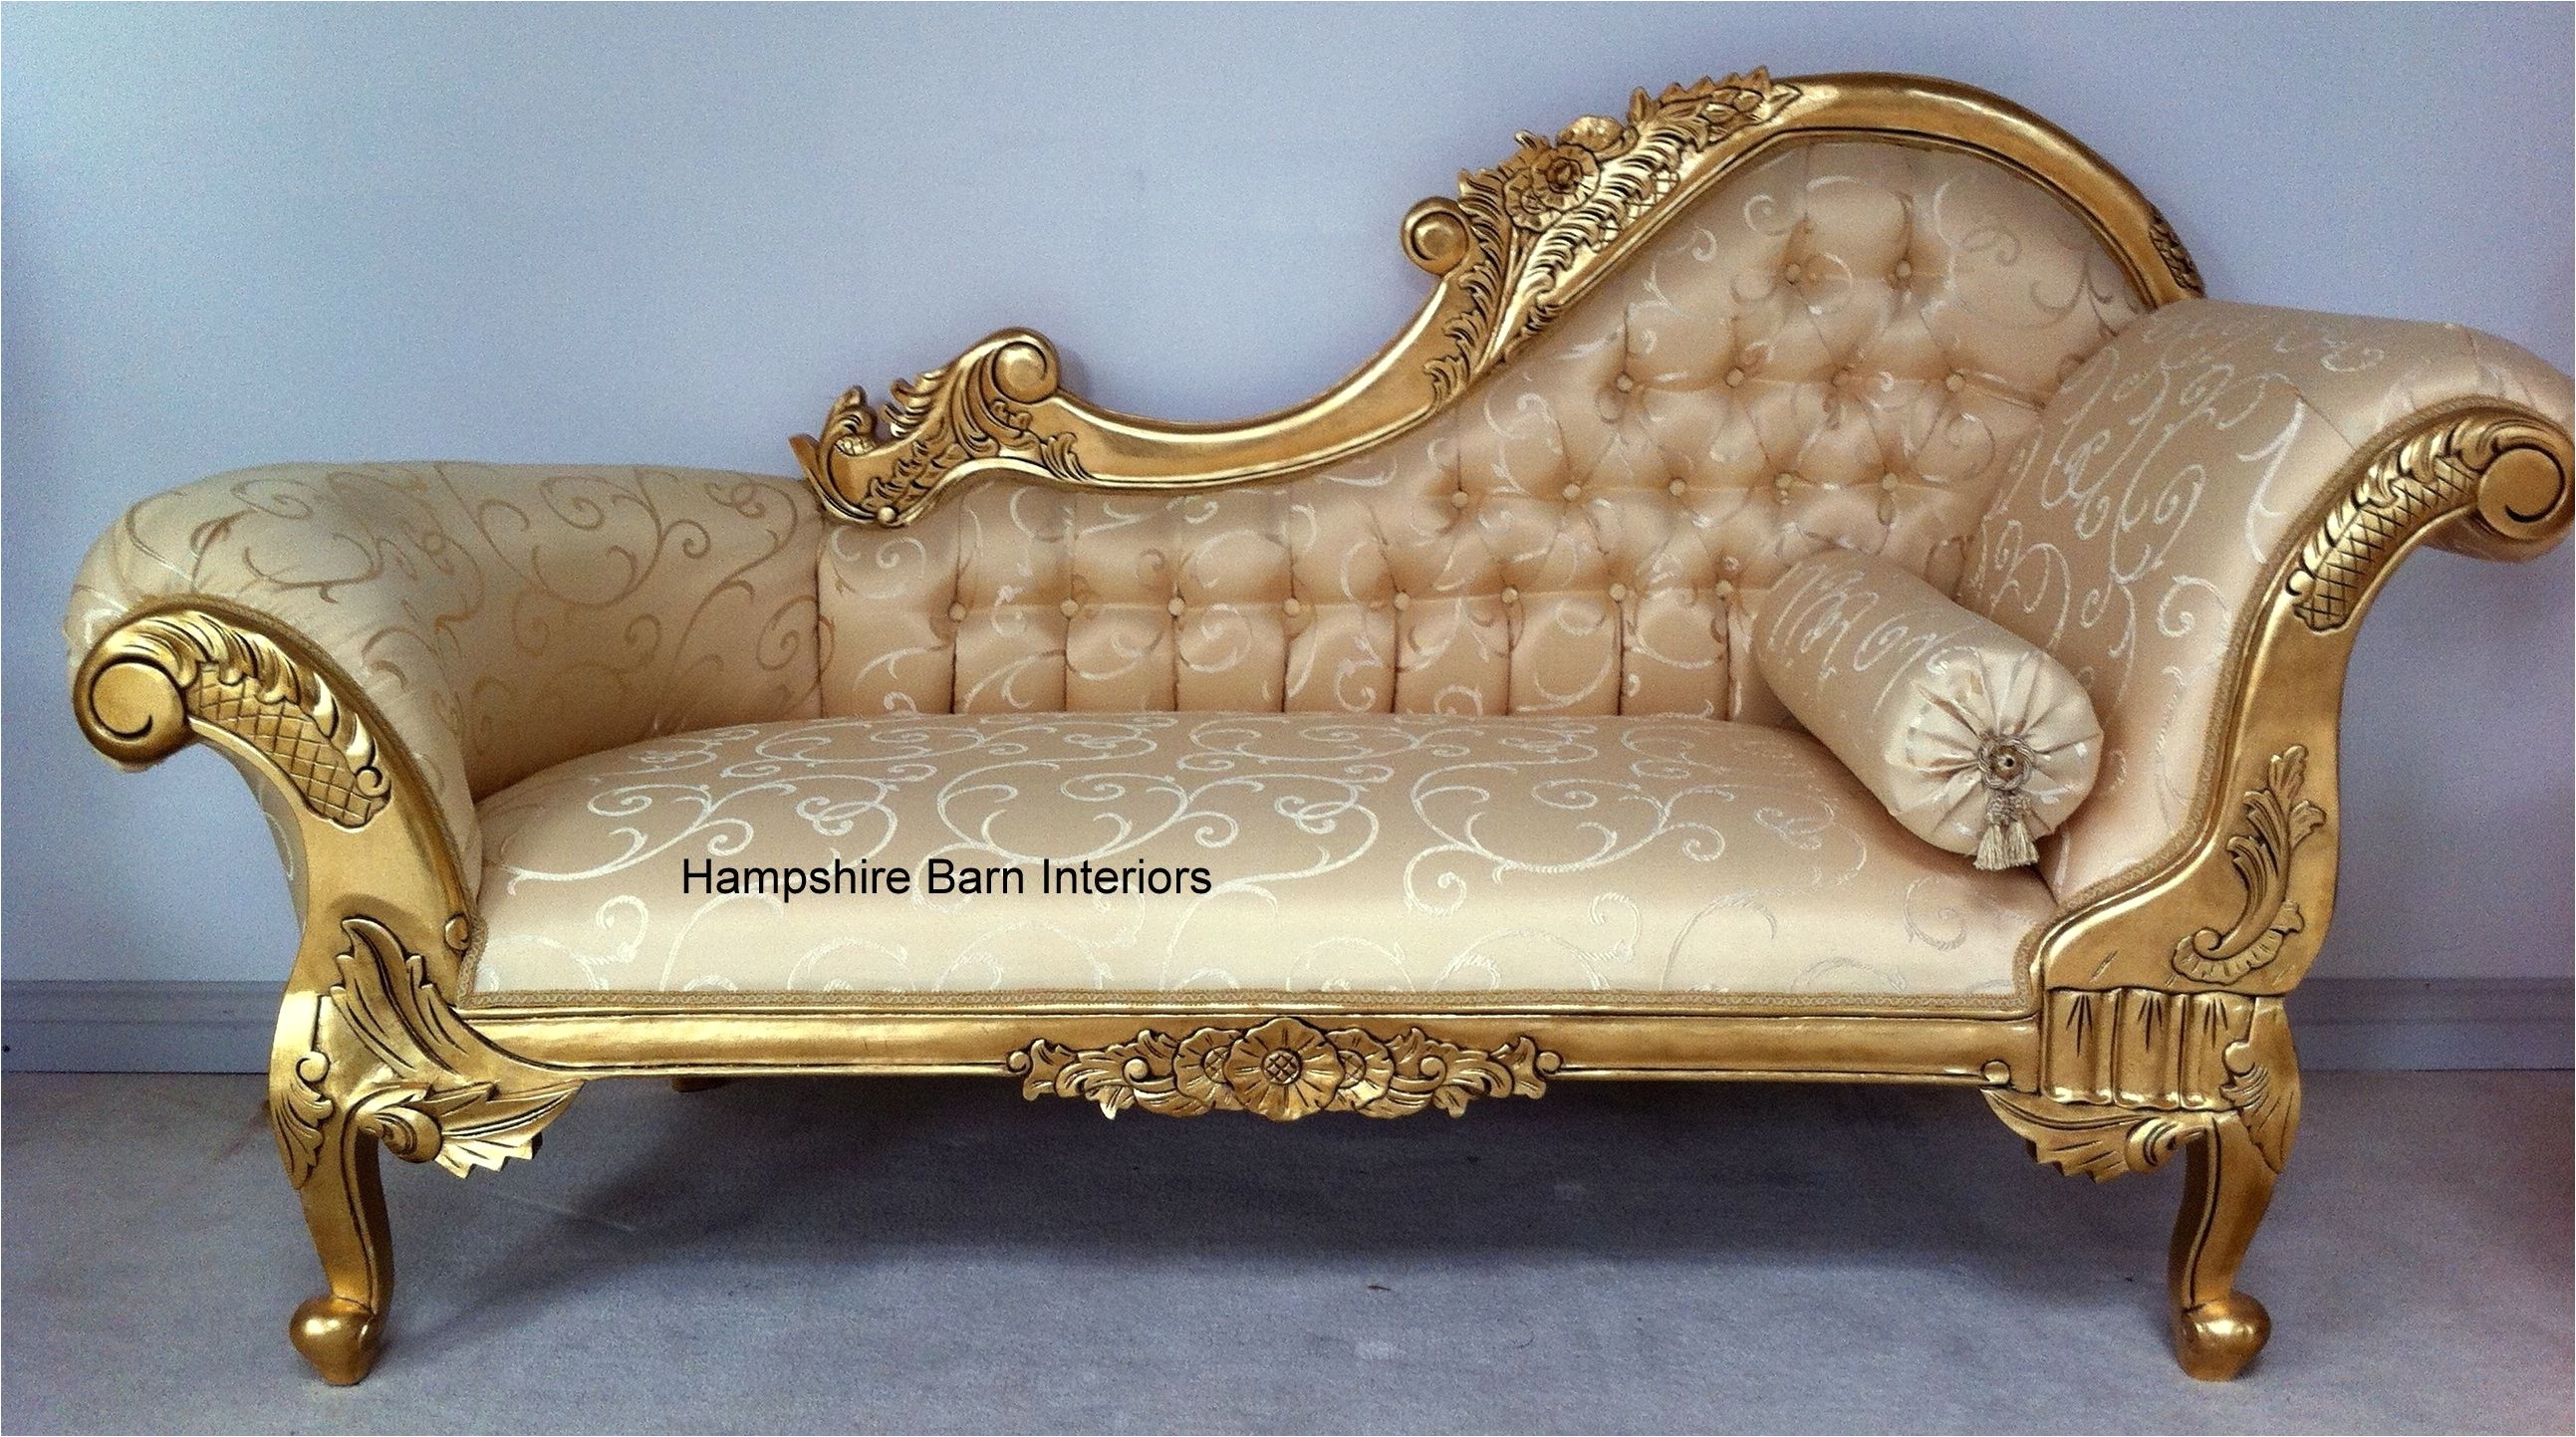 Fainting Chair History Gold Leaf French Provincial Furniture Tuscan Old World Italian